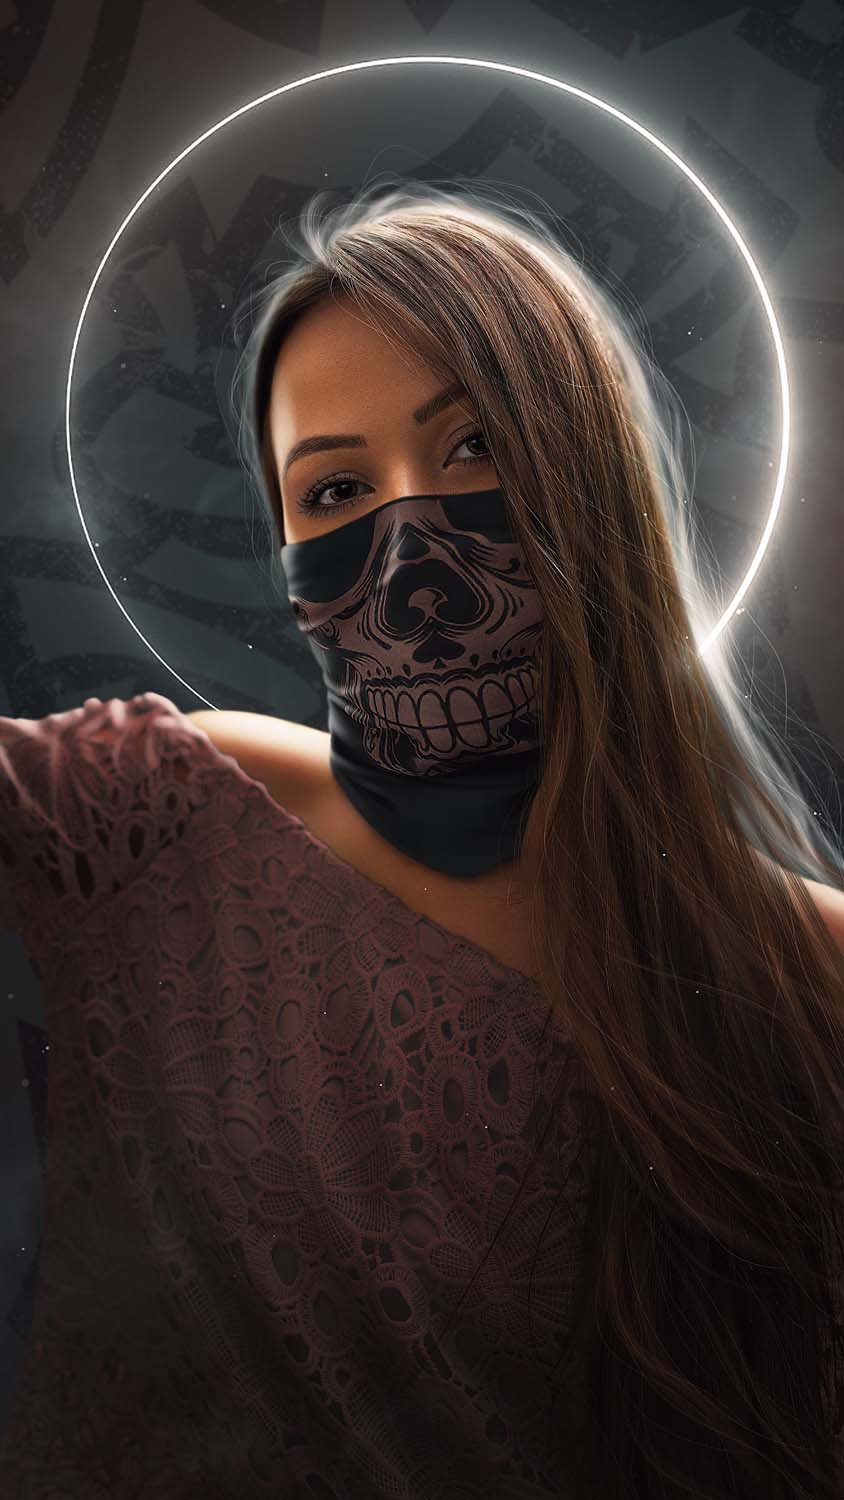 Ghost Mask Girl IPhone Wallpaper HD 1 - IPhone Wallpapers : iPhone  Wallpapers